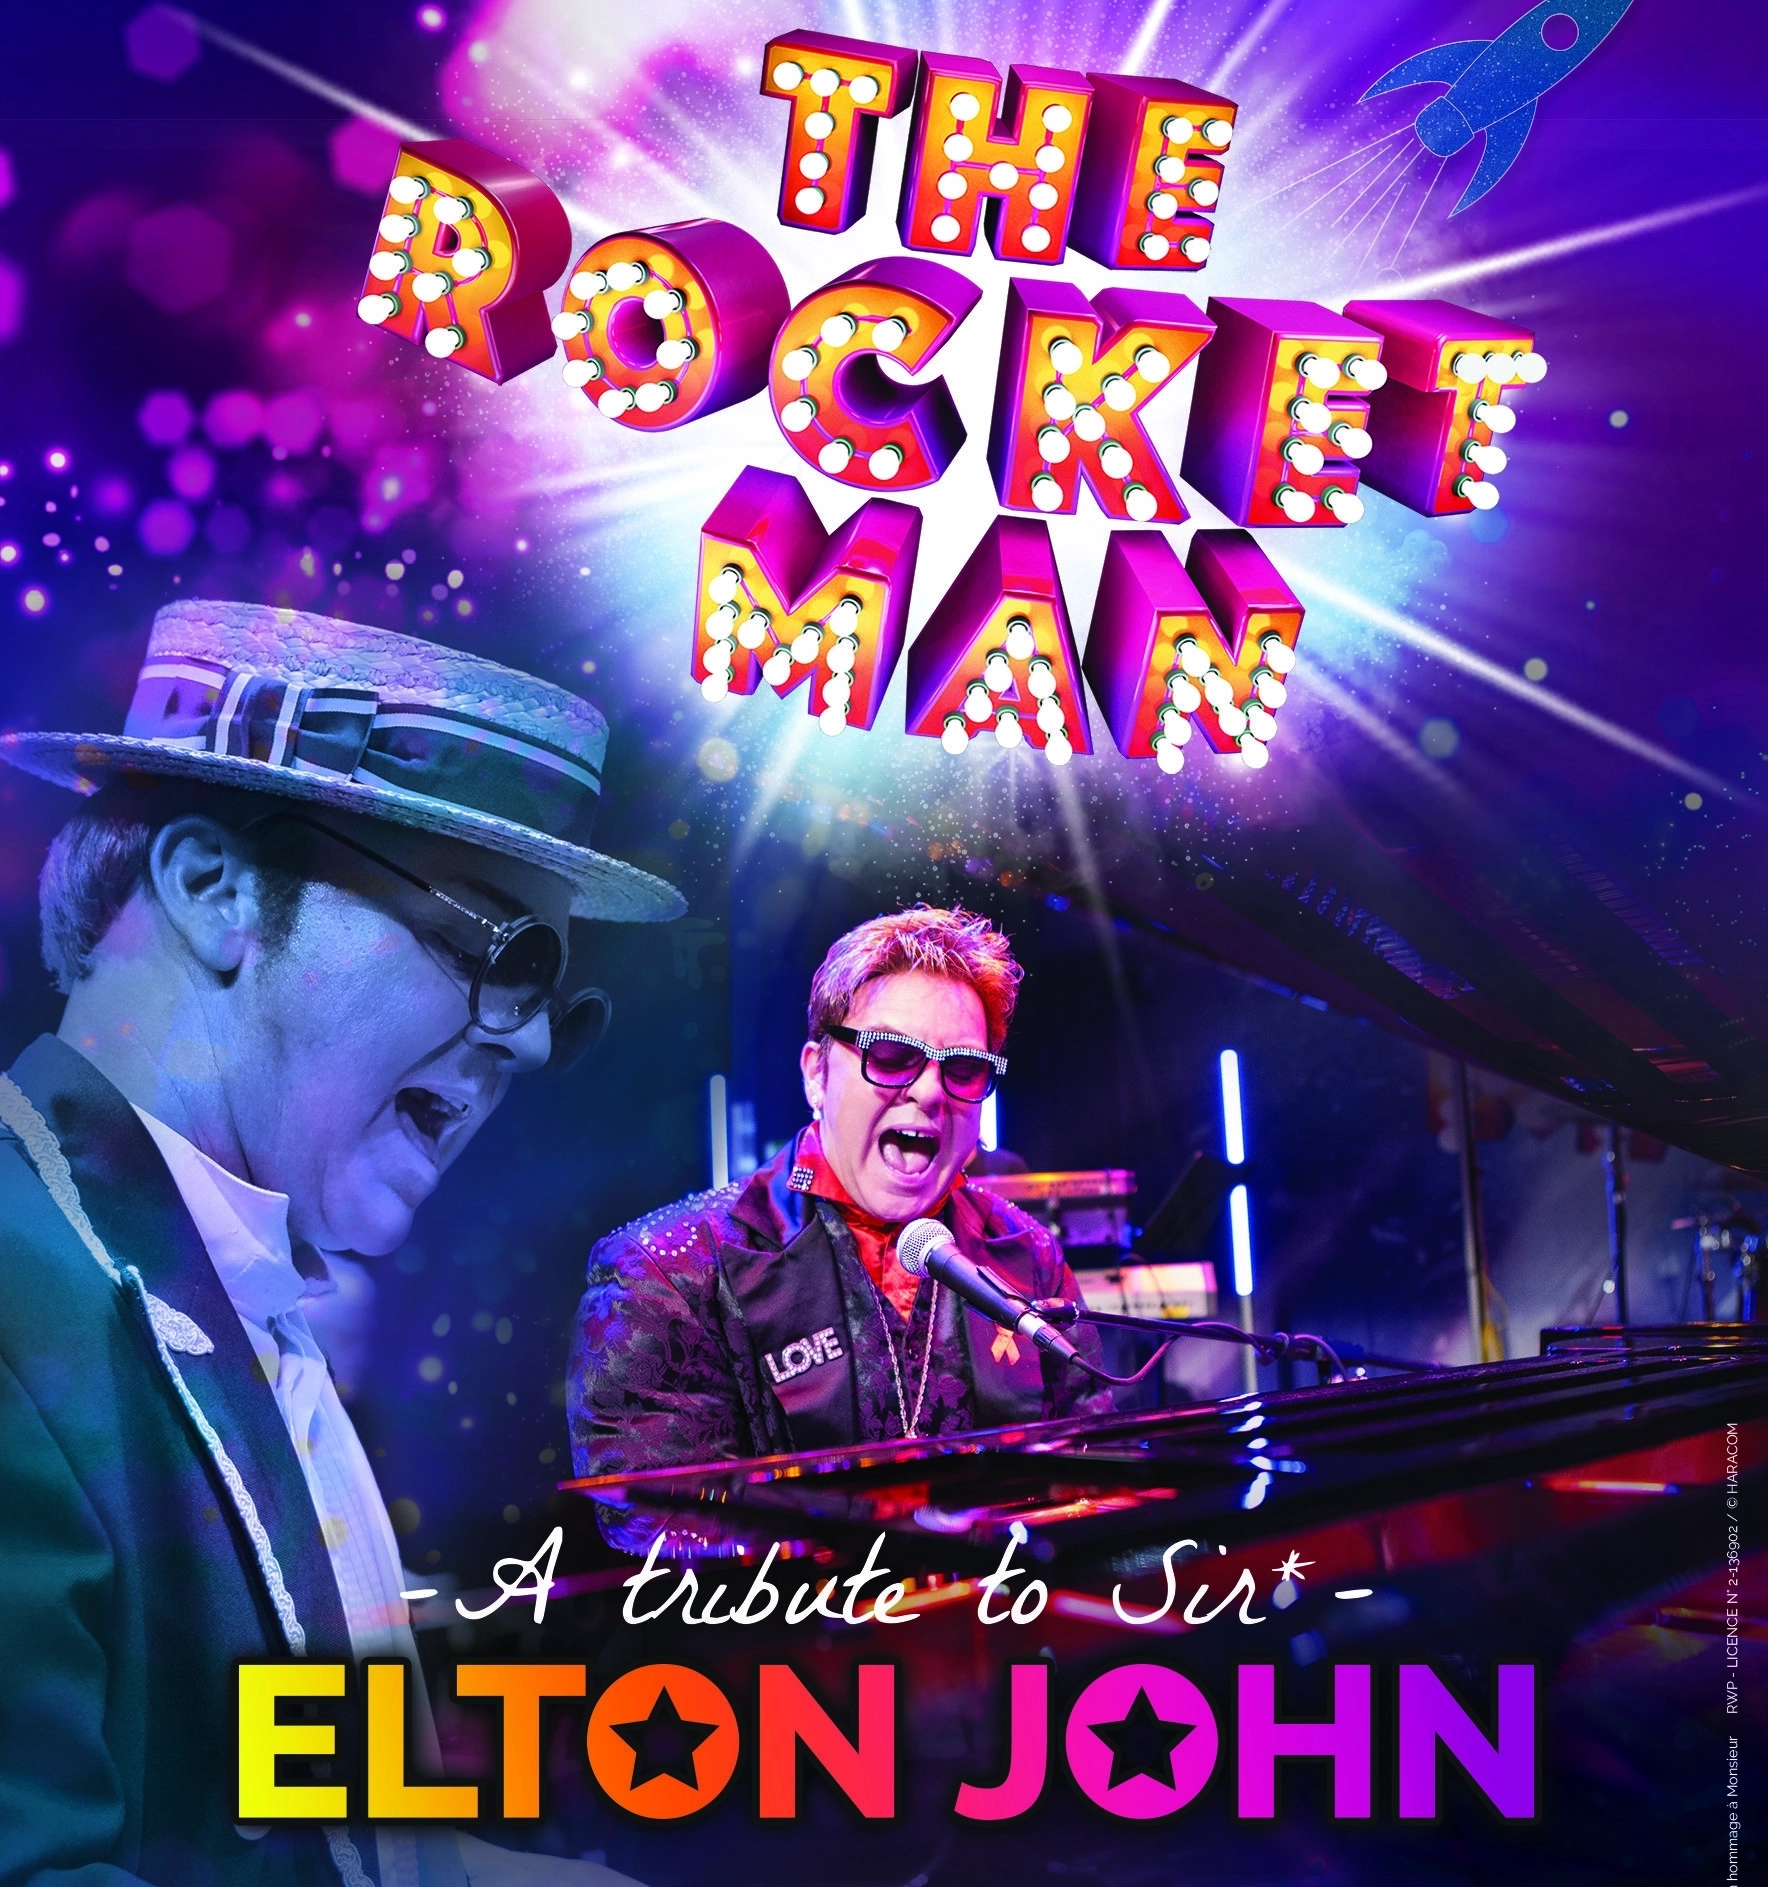 The Rocket Man at Sceneo Tickets